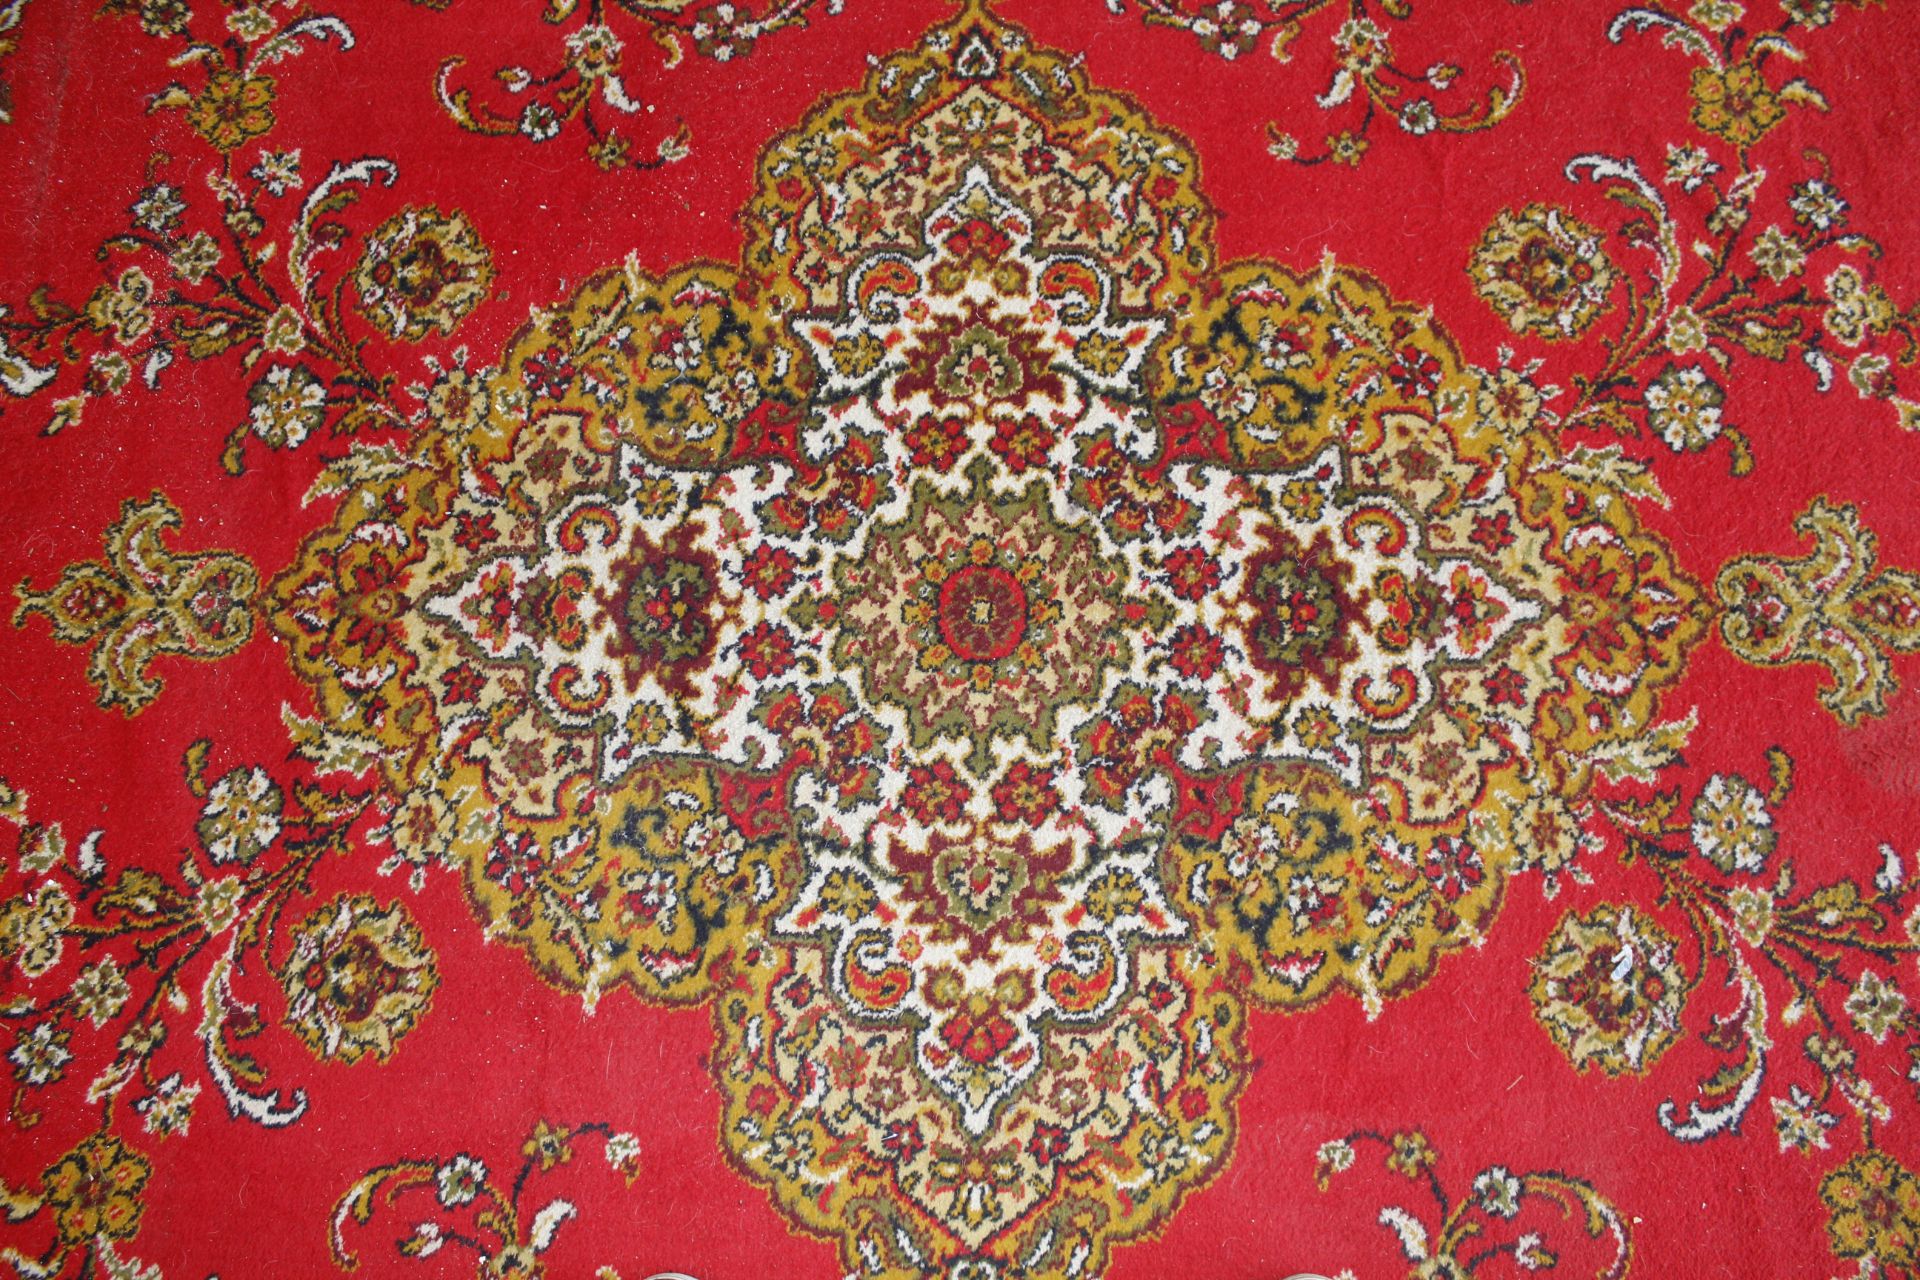 An approx. 12' x 9' red patterned rug AF - Image 2 of 11